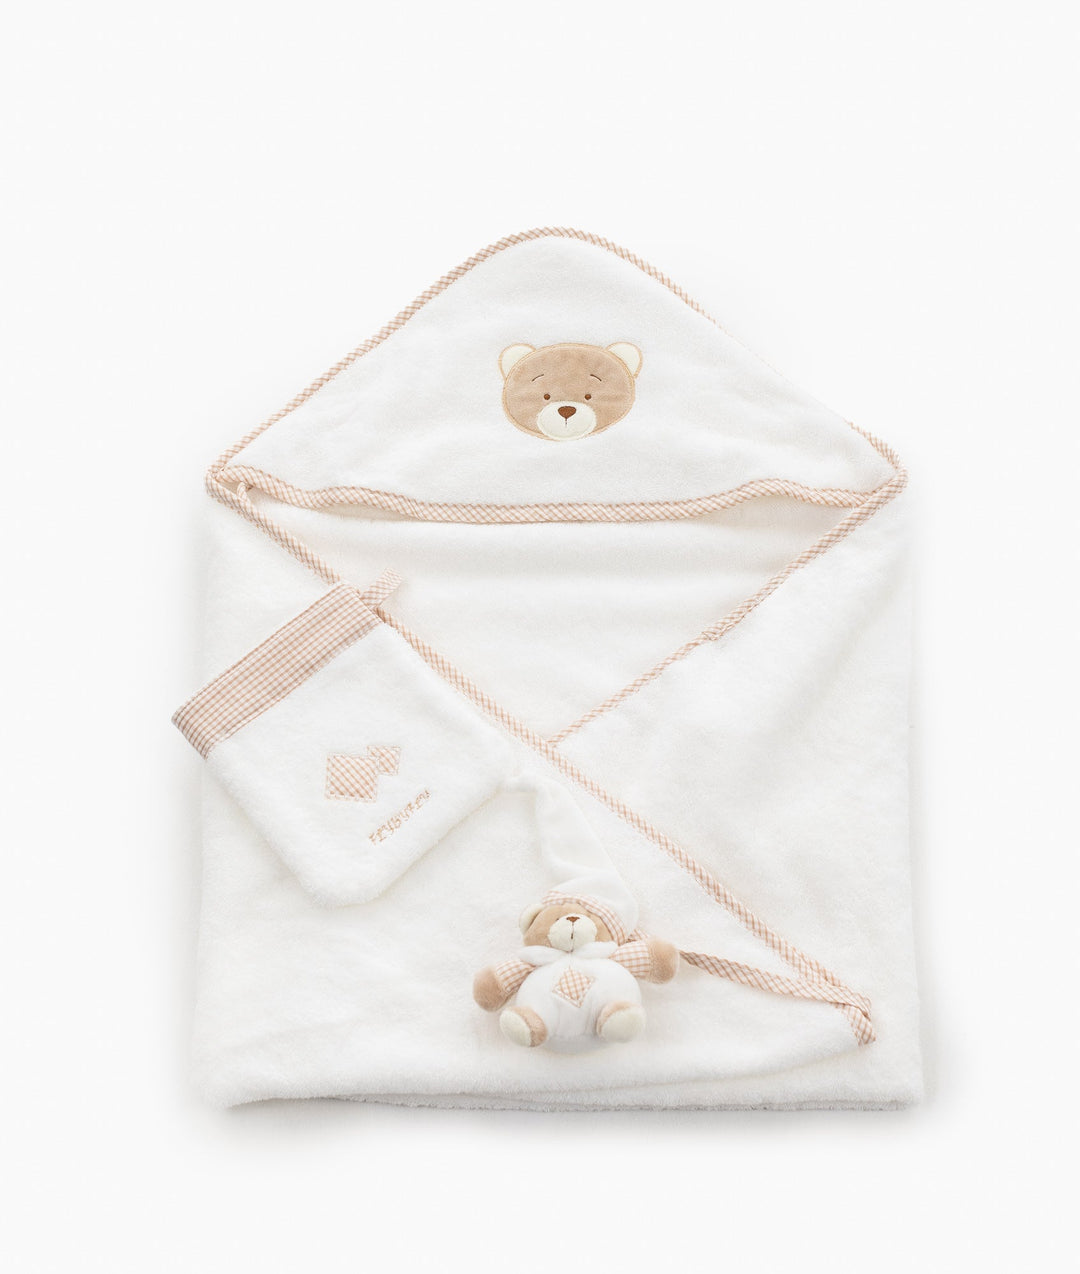 Hooded Towel with Mitt & Toy - Beige